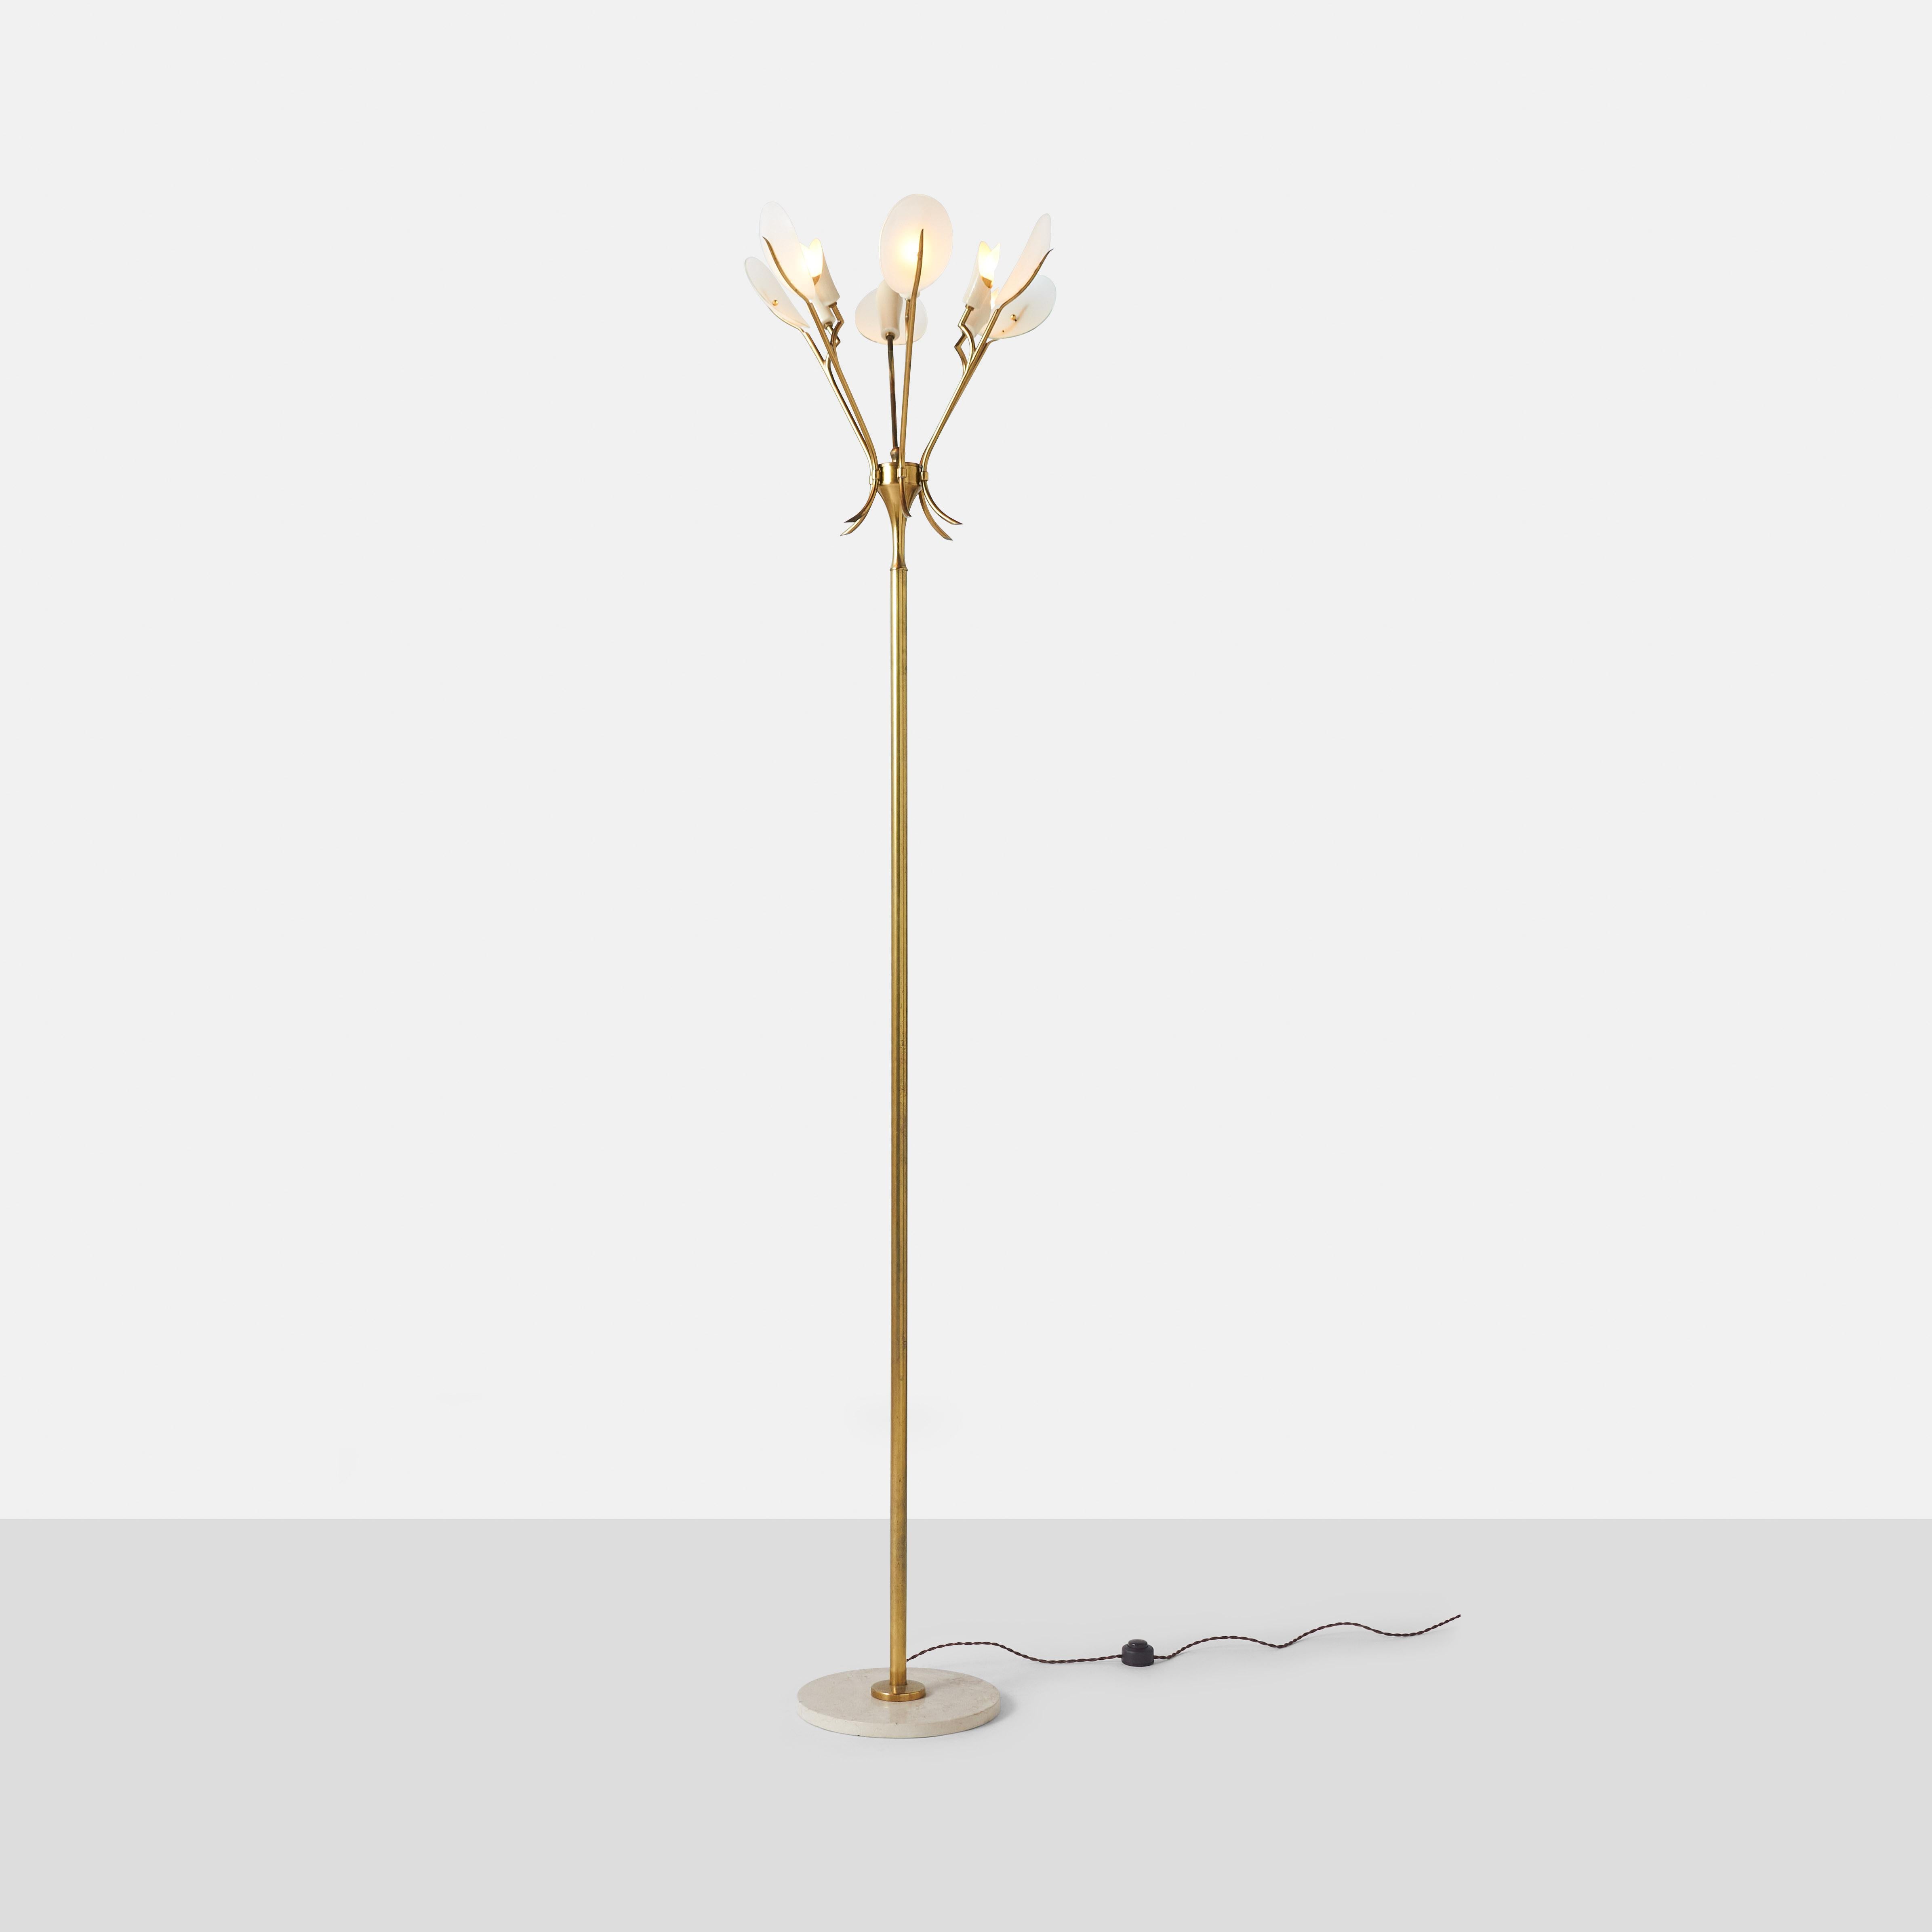 A tall floor lamp made by Arredoluce with brass arms and a travertine base.
Attached frosted glass shrouds curve gently around the bulbs.